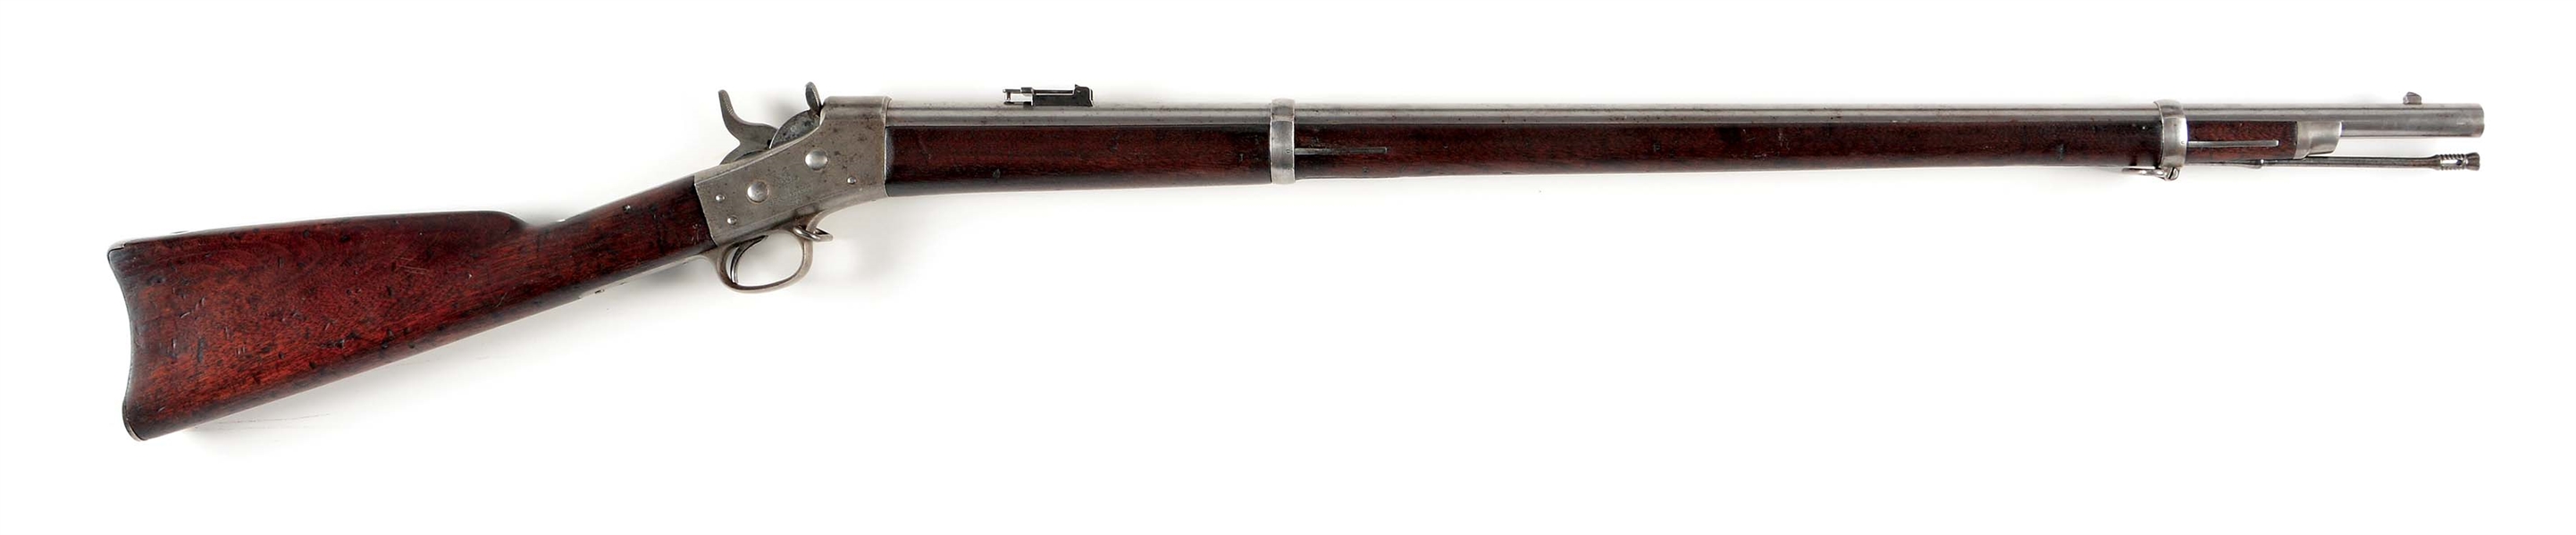 (A) US 1870 TRIAL SPRINGFIELD-REMINGTON ROLLING BLOCK ARMY RIFLE.